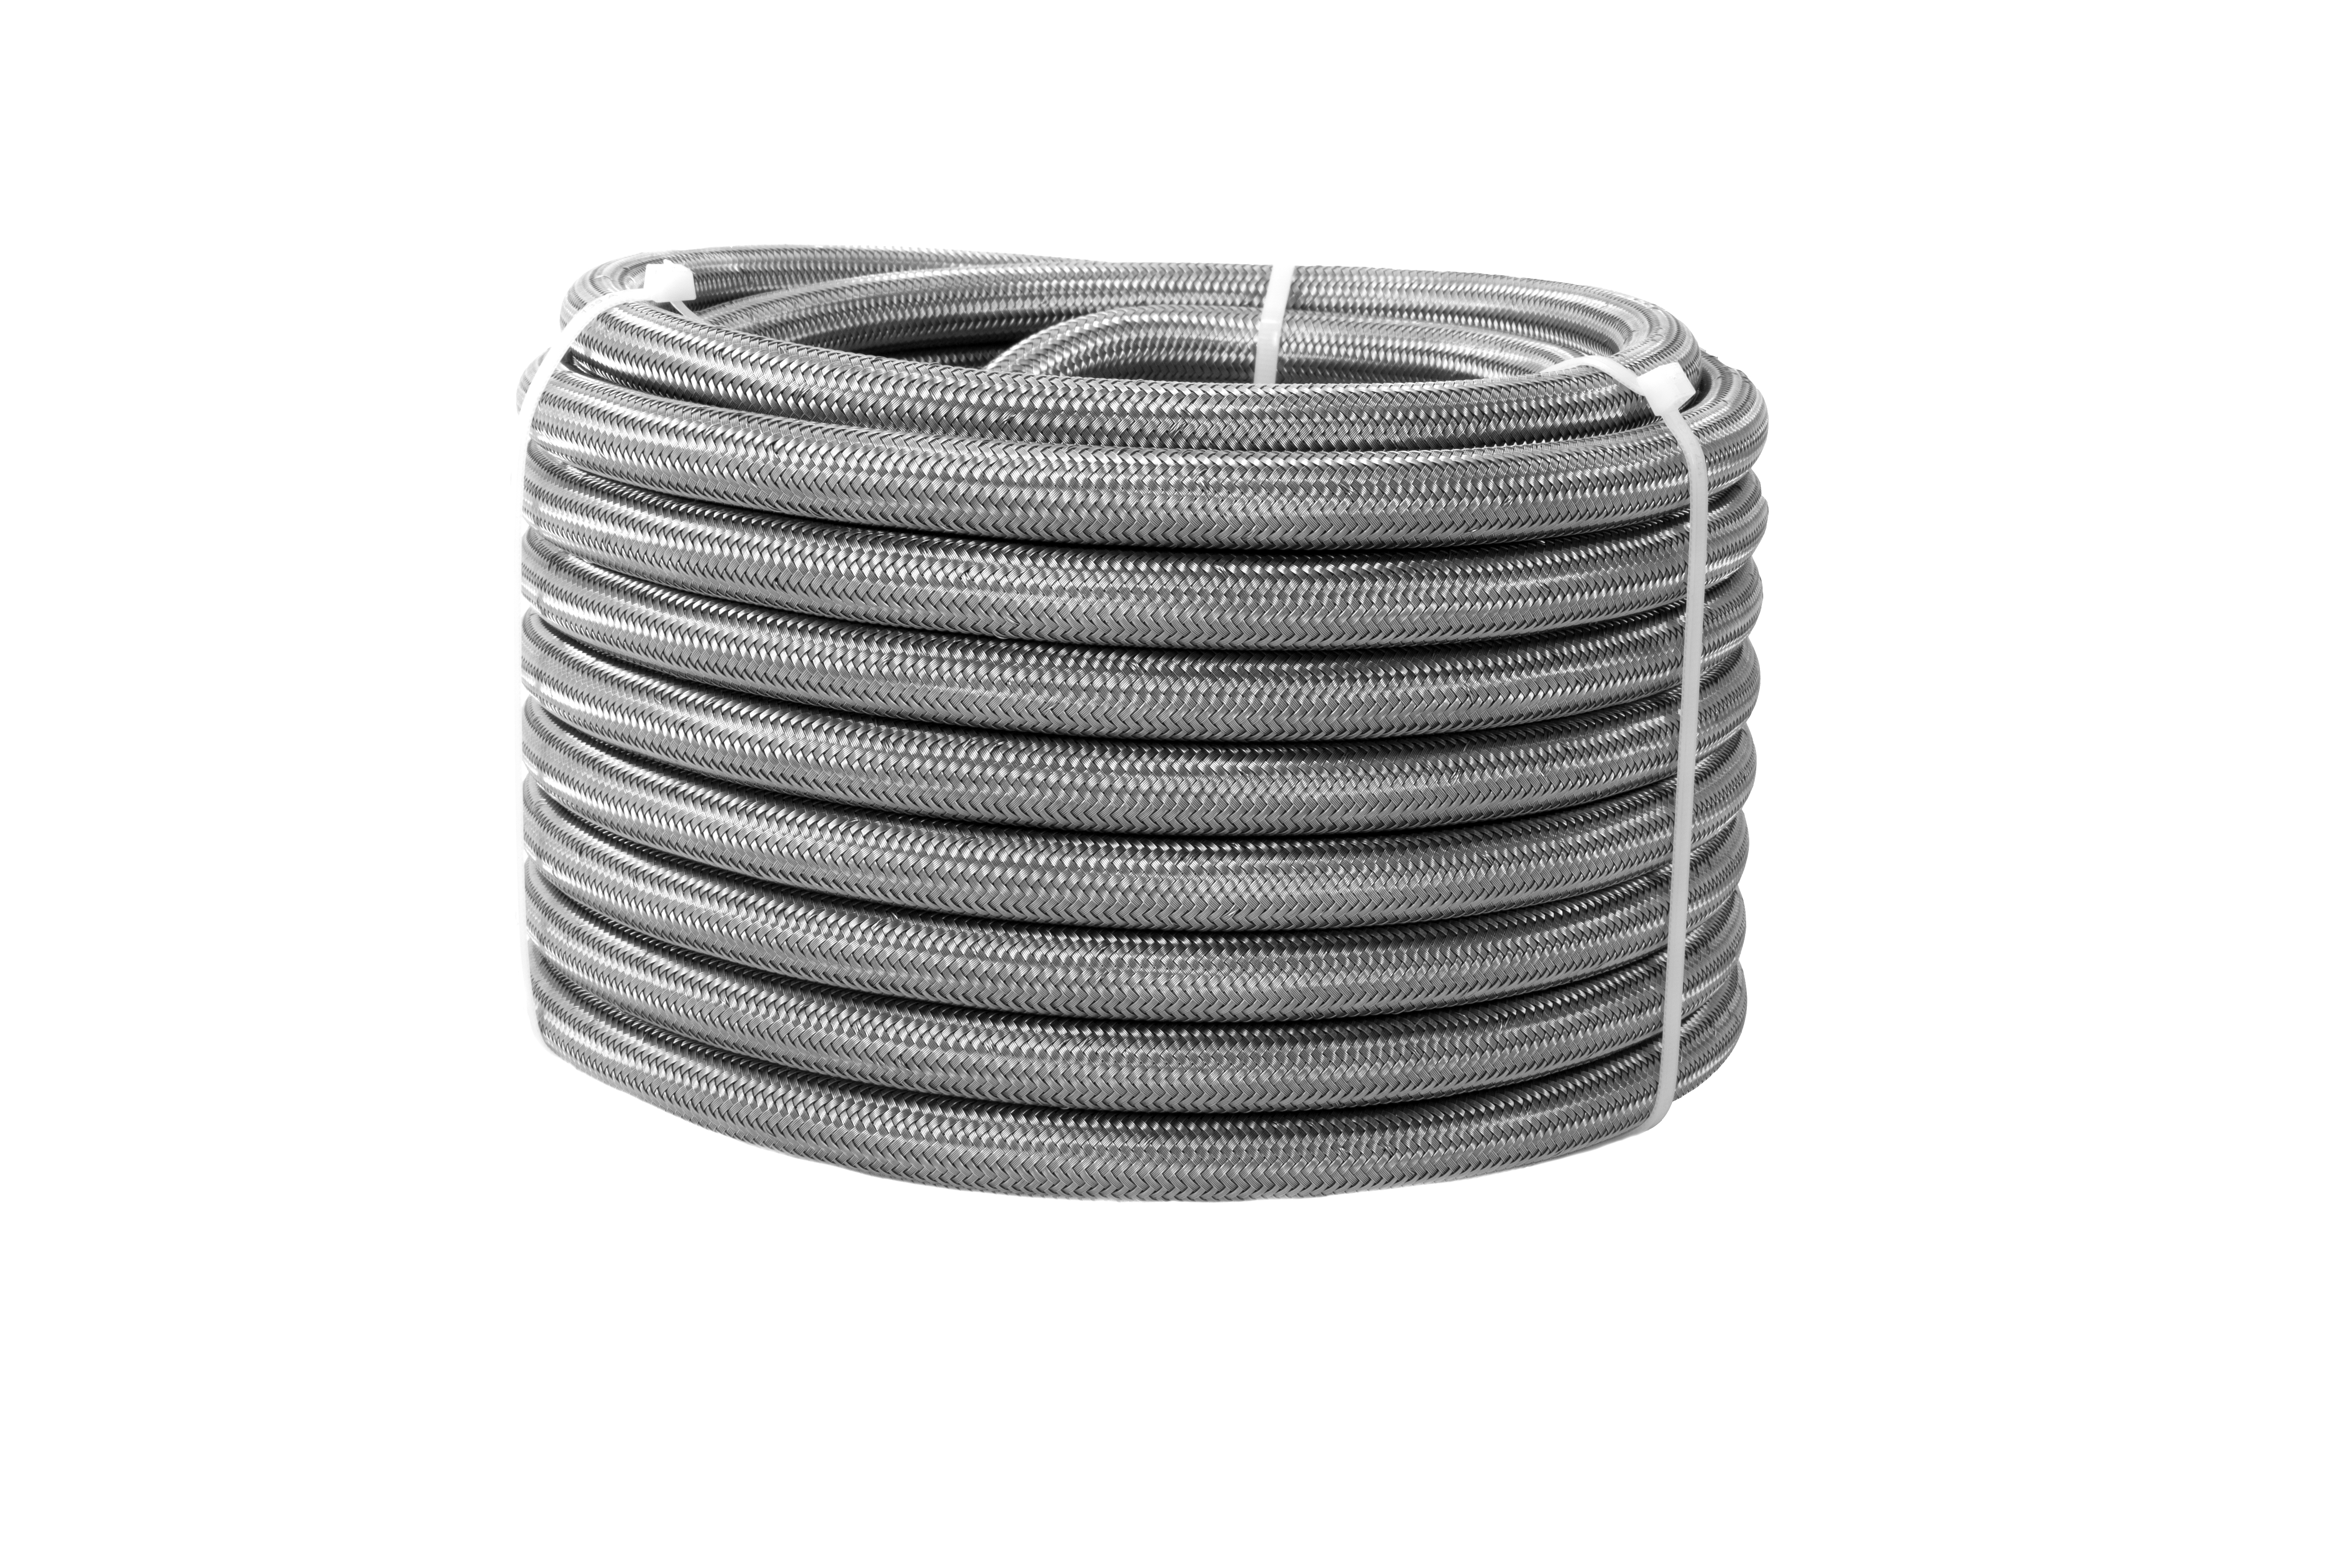 Aeromotive 15317 Hose, 8 AN, 20 ft, Braided Stainless / PTFE, Natural, Each